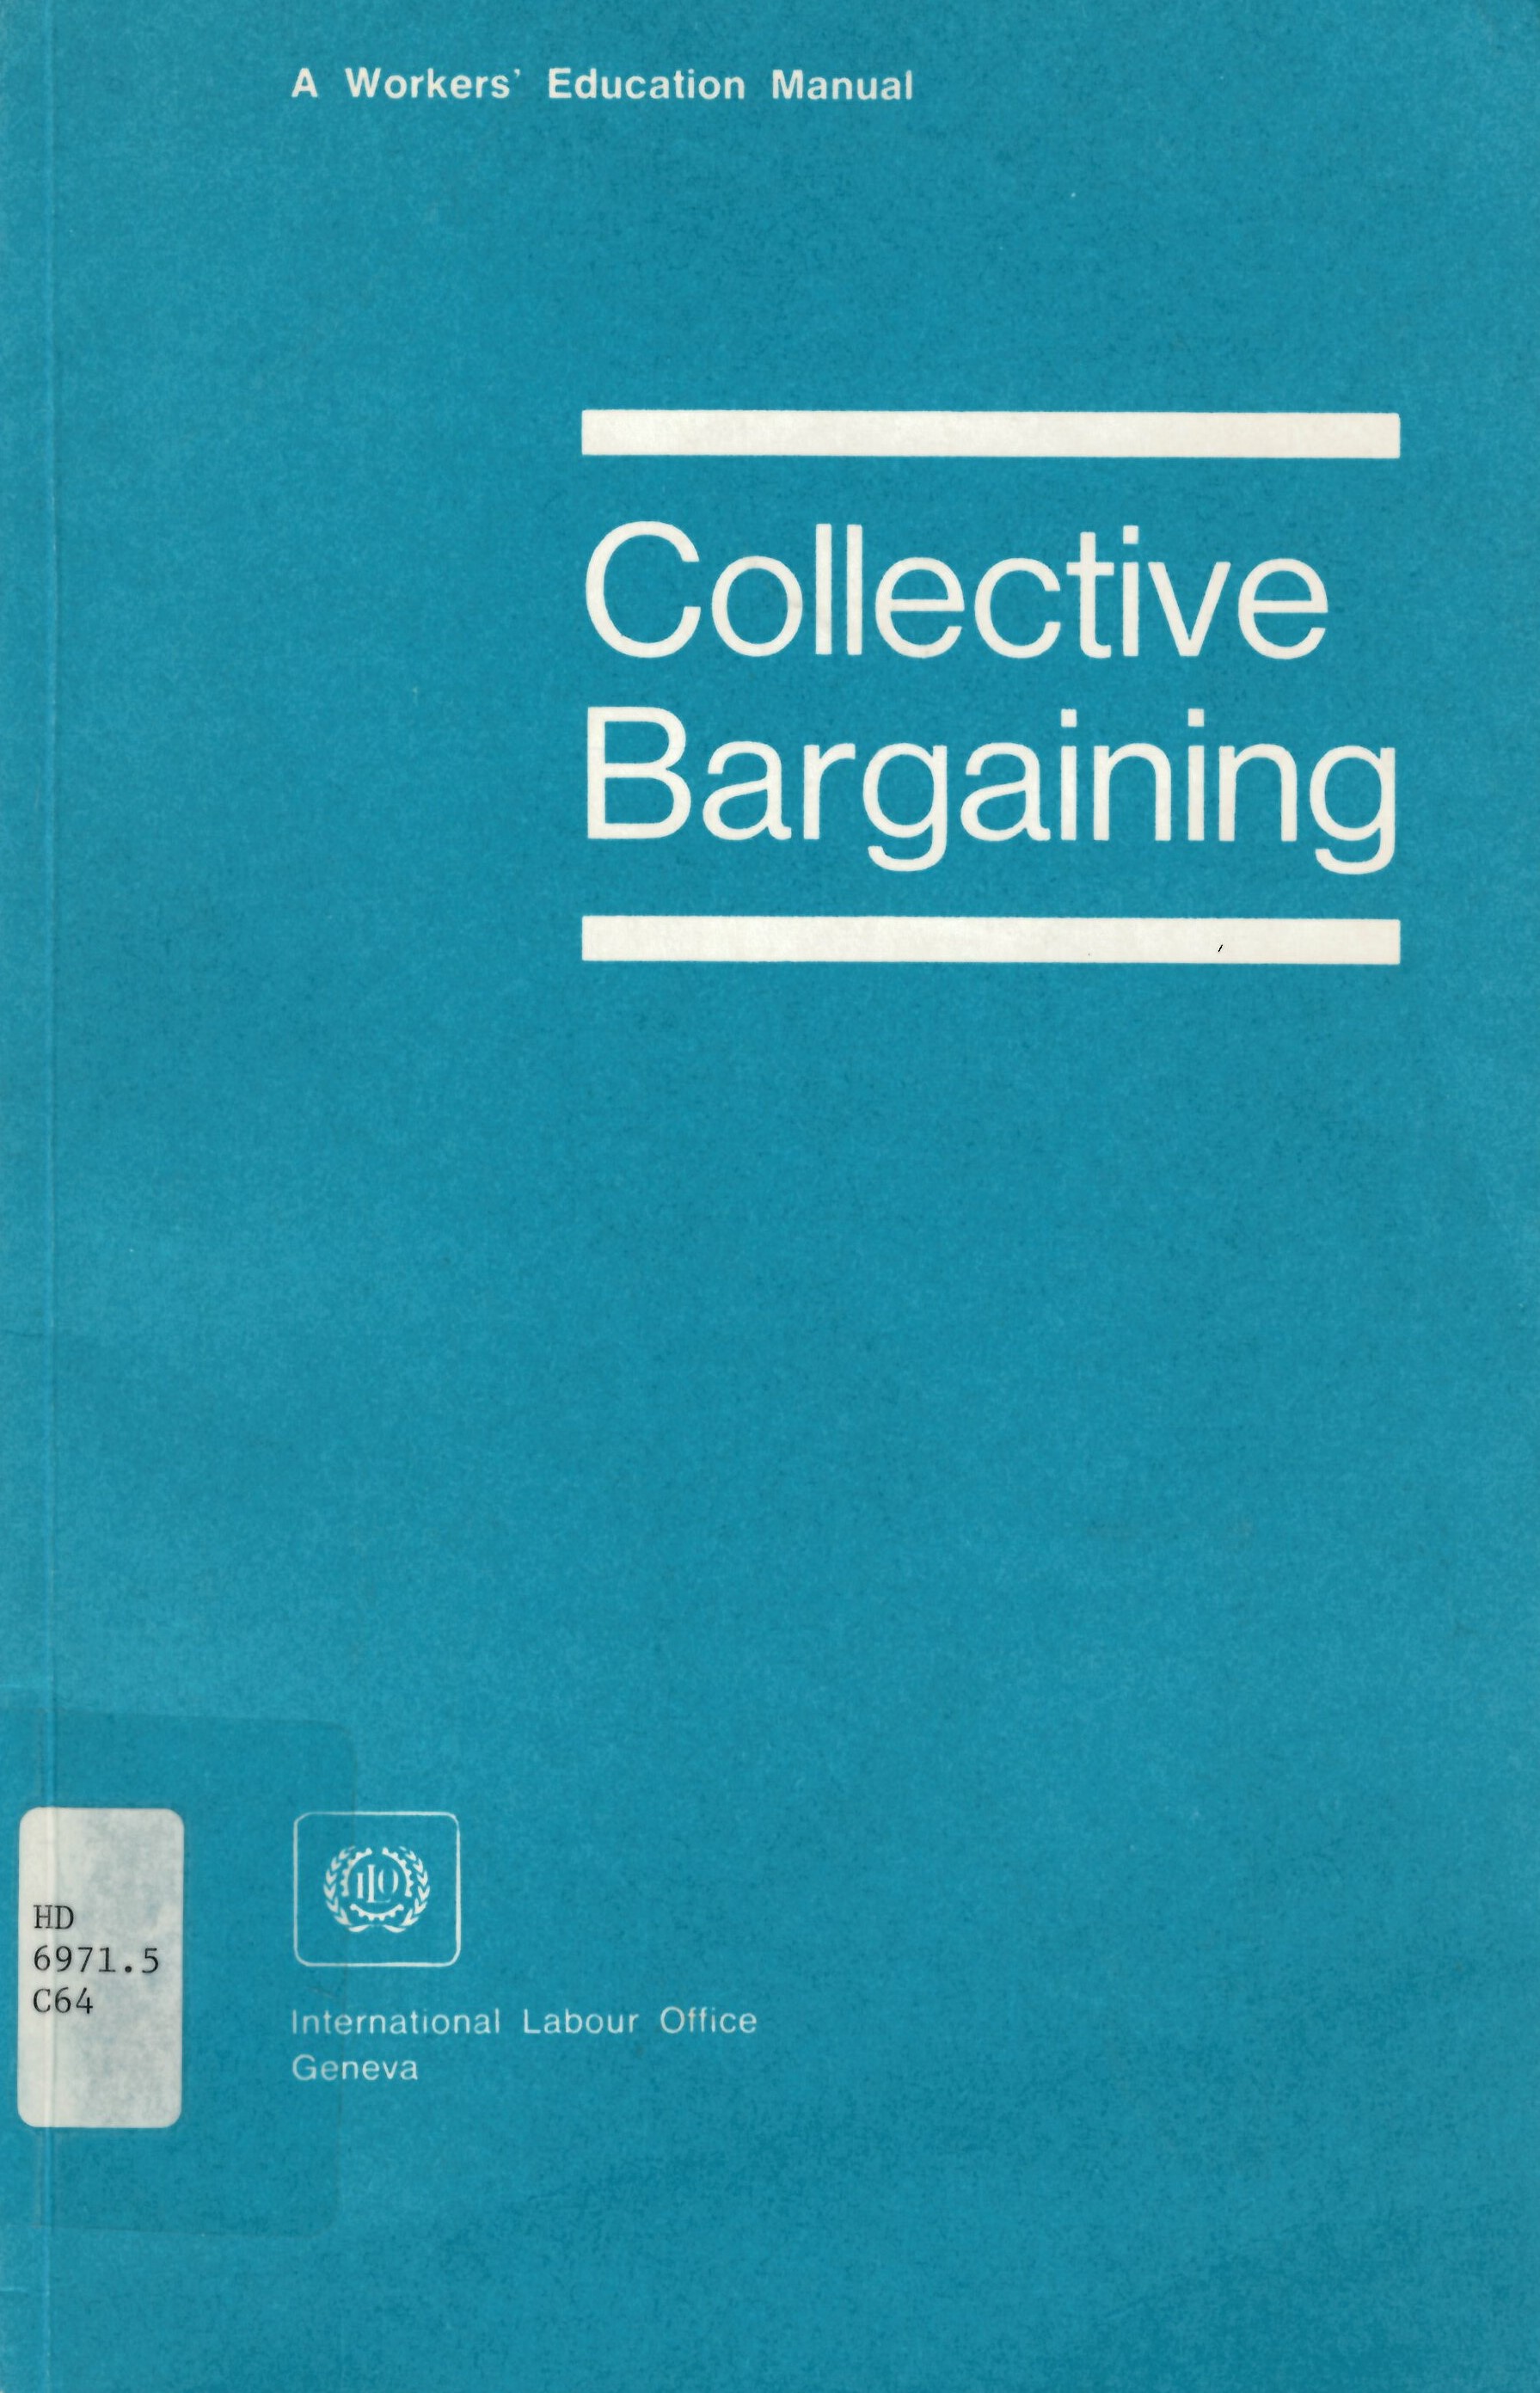 Collective bargaining: a worker's education manual